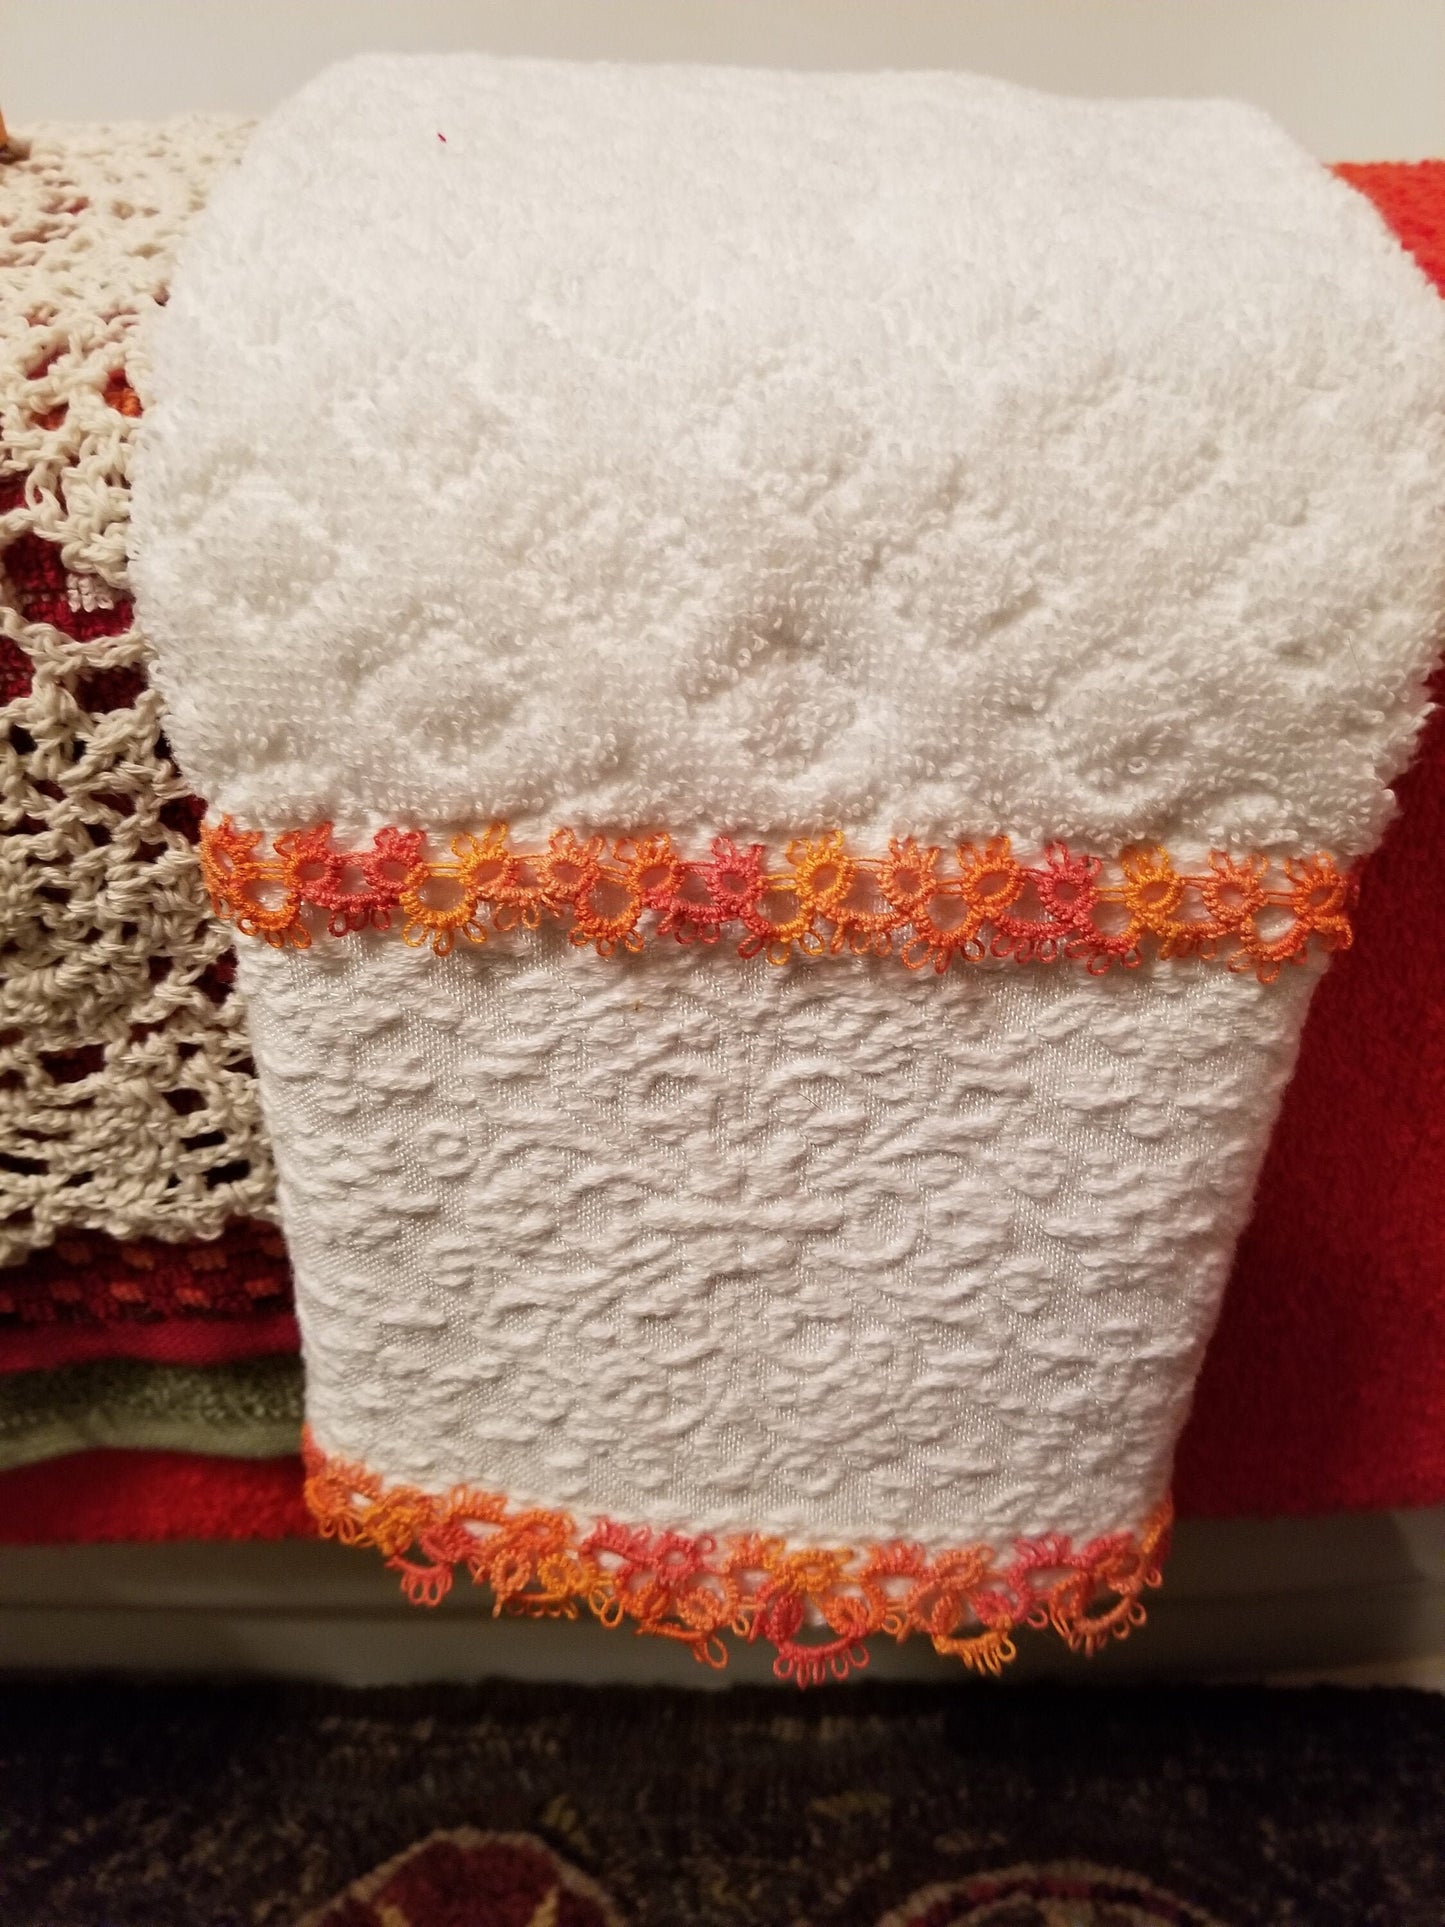 Handmade Tatted Lace Edged Hand Towel, Decorative Custom Colors